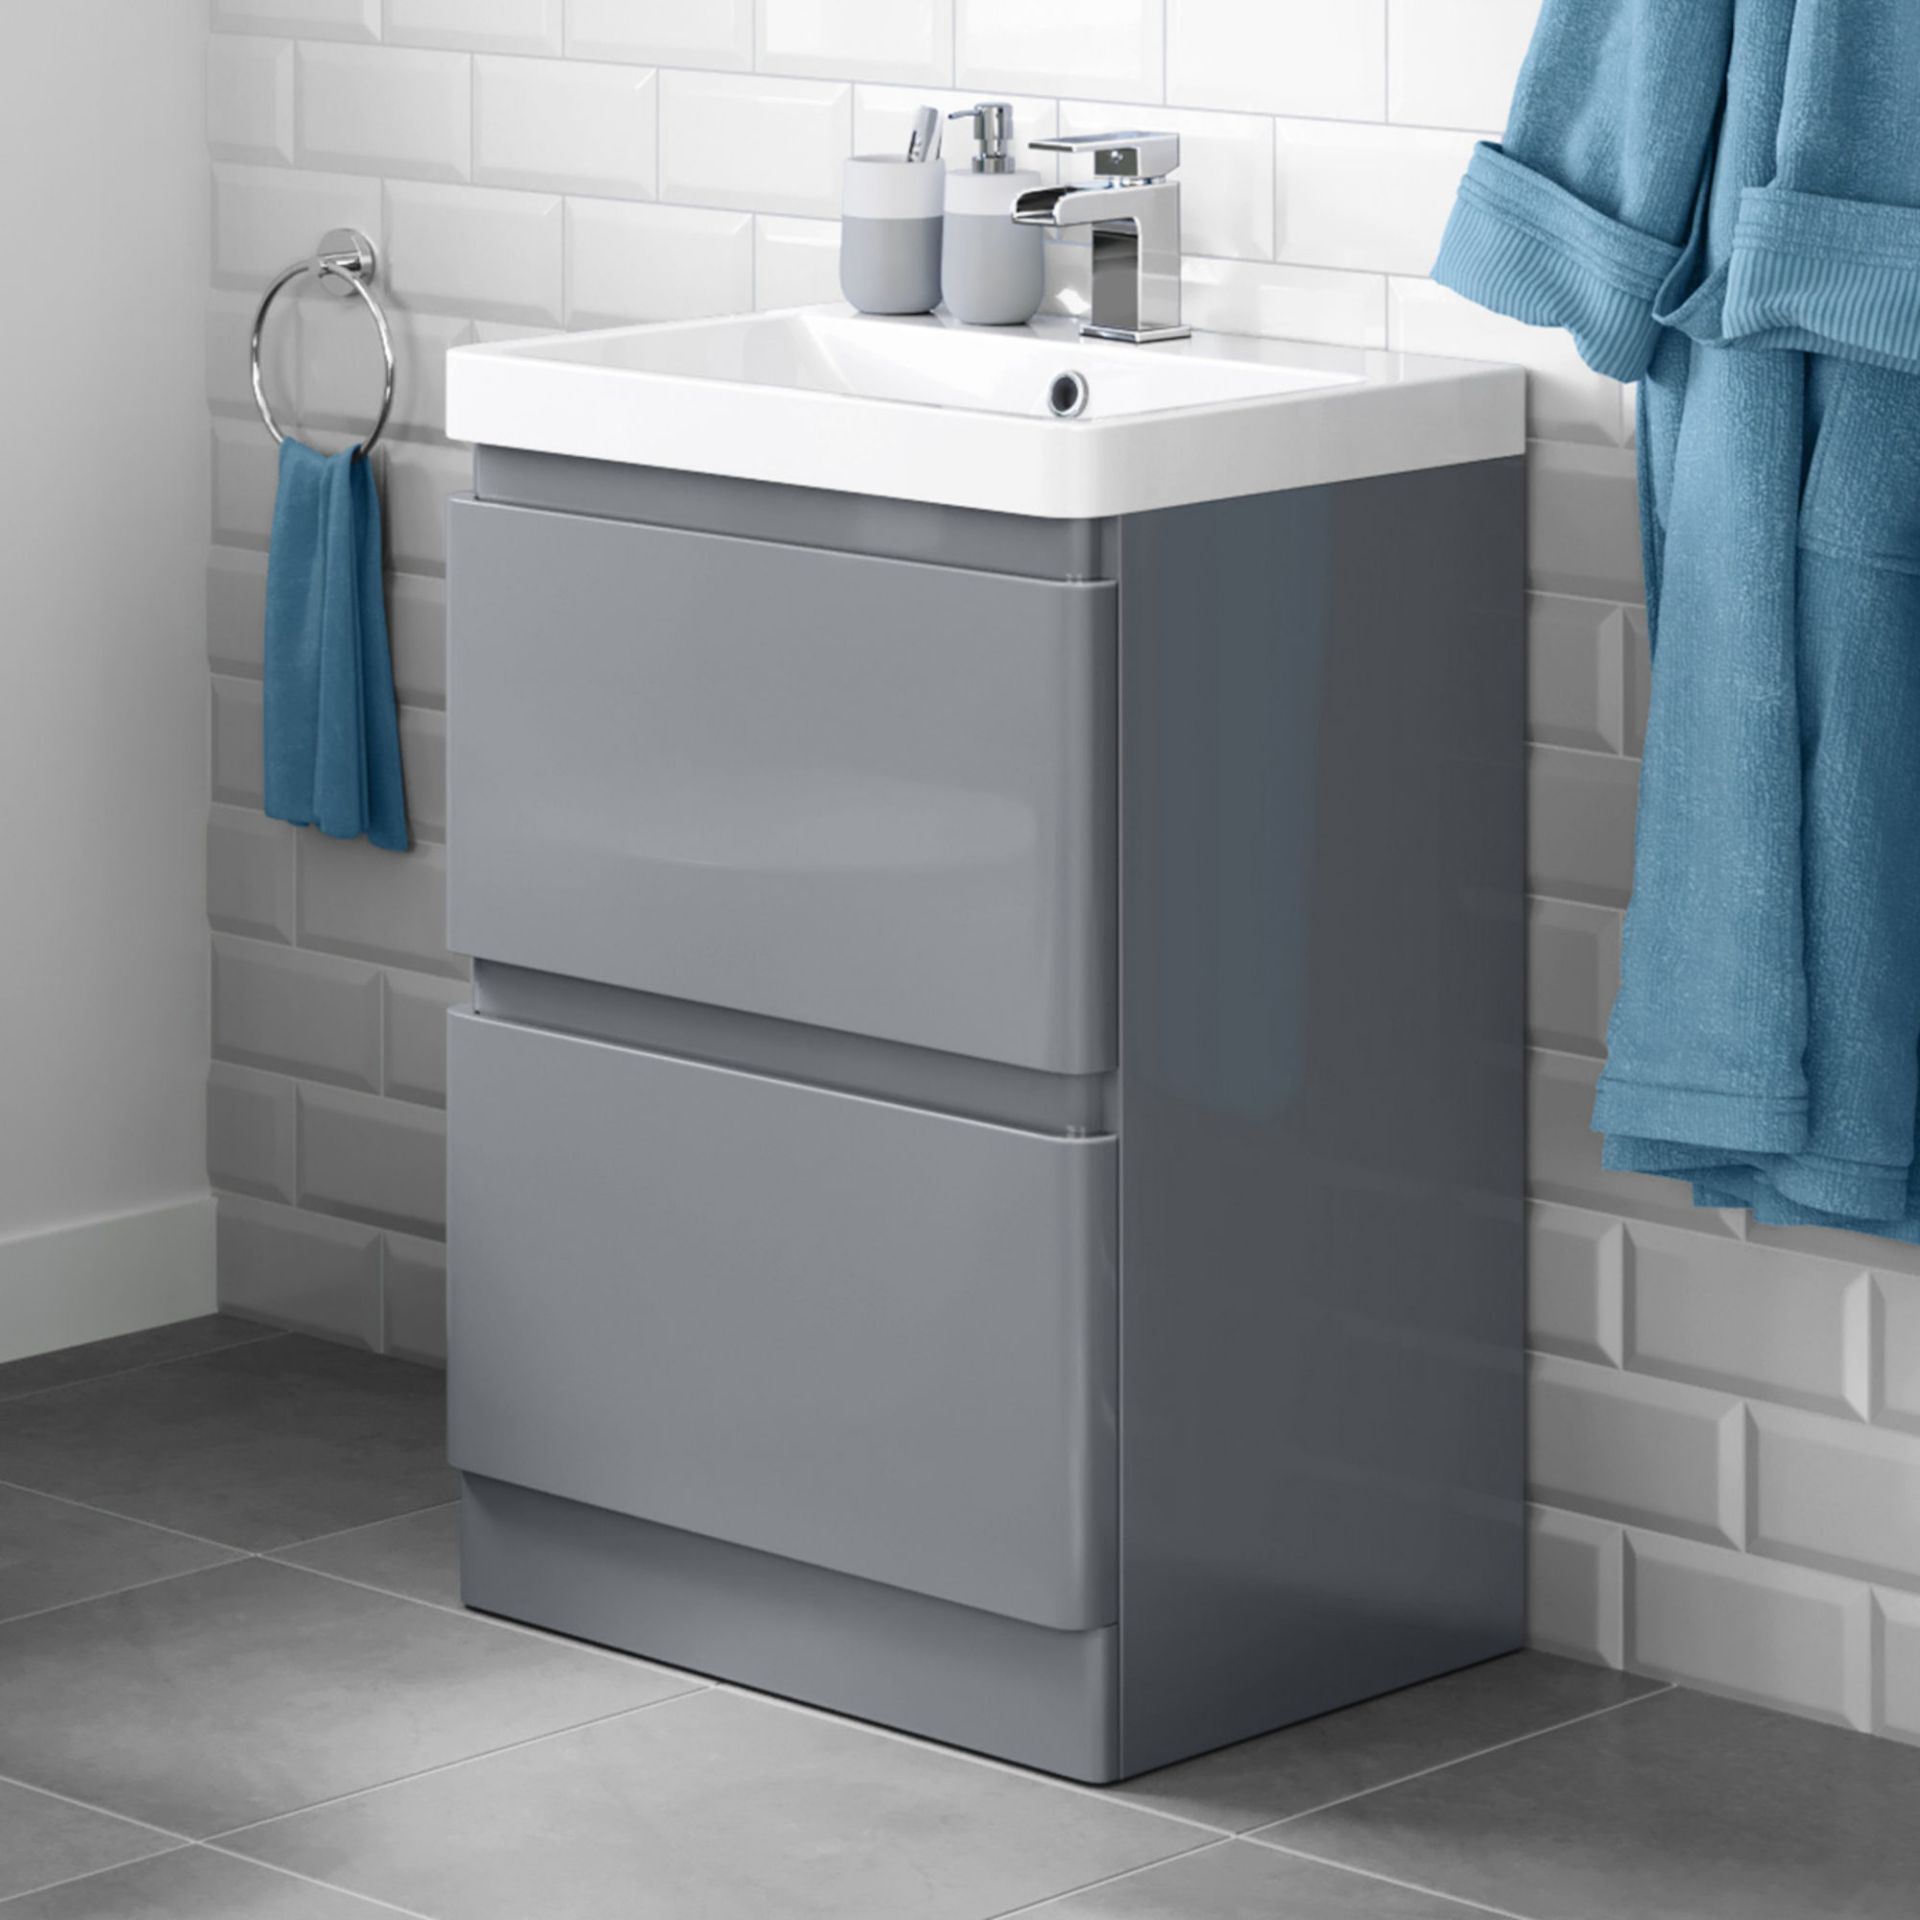 (PM7) 600mm Denver Gloss Grey Built In Sink Drawer Unit - Floor Standing. RRP £499.99. Comes ...